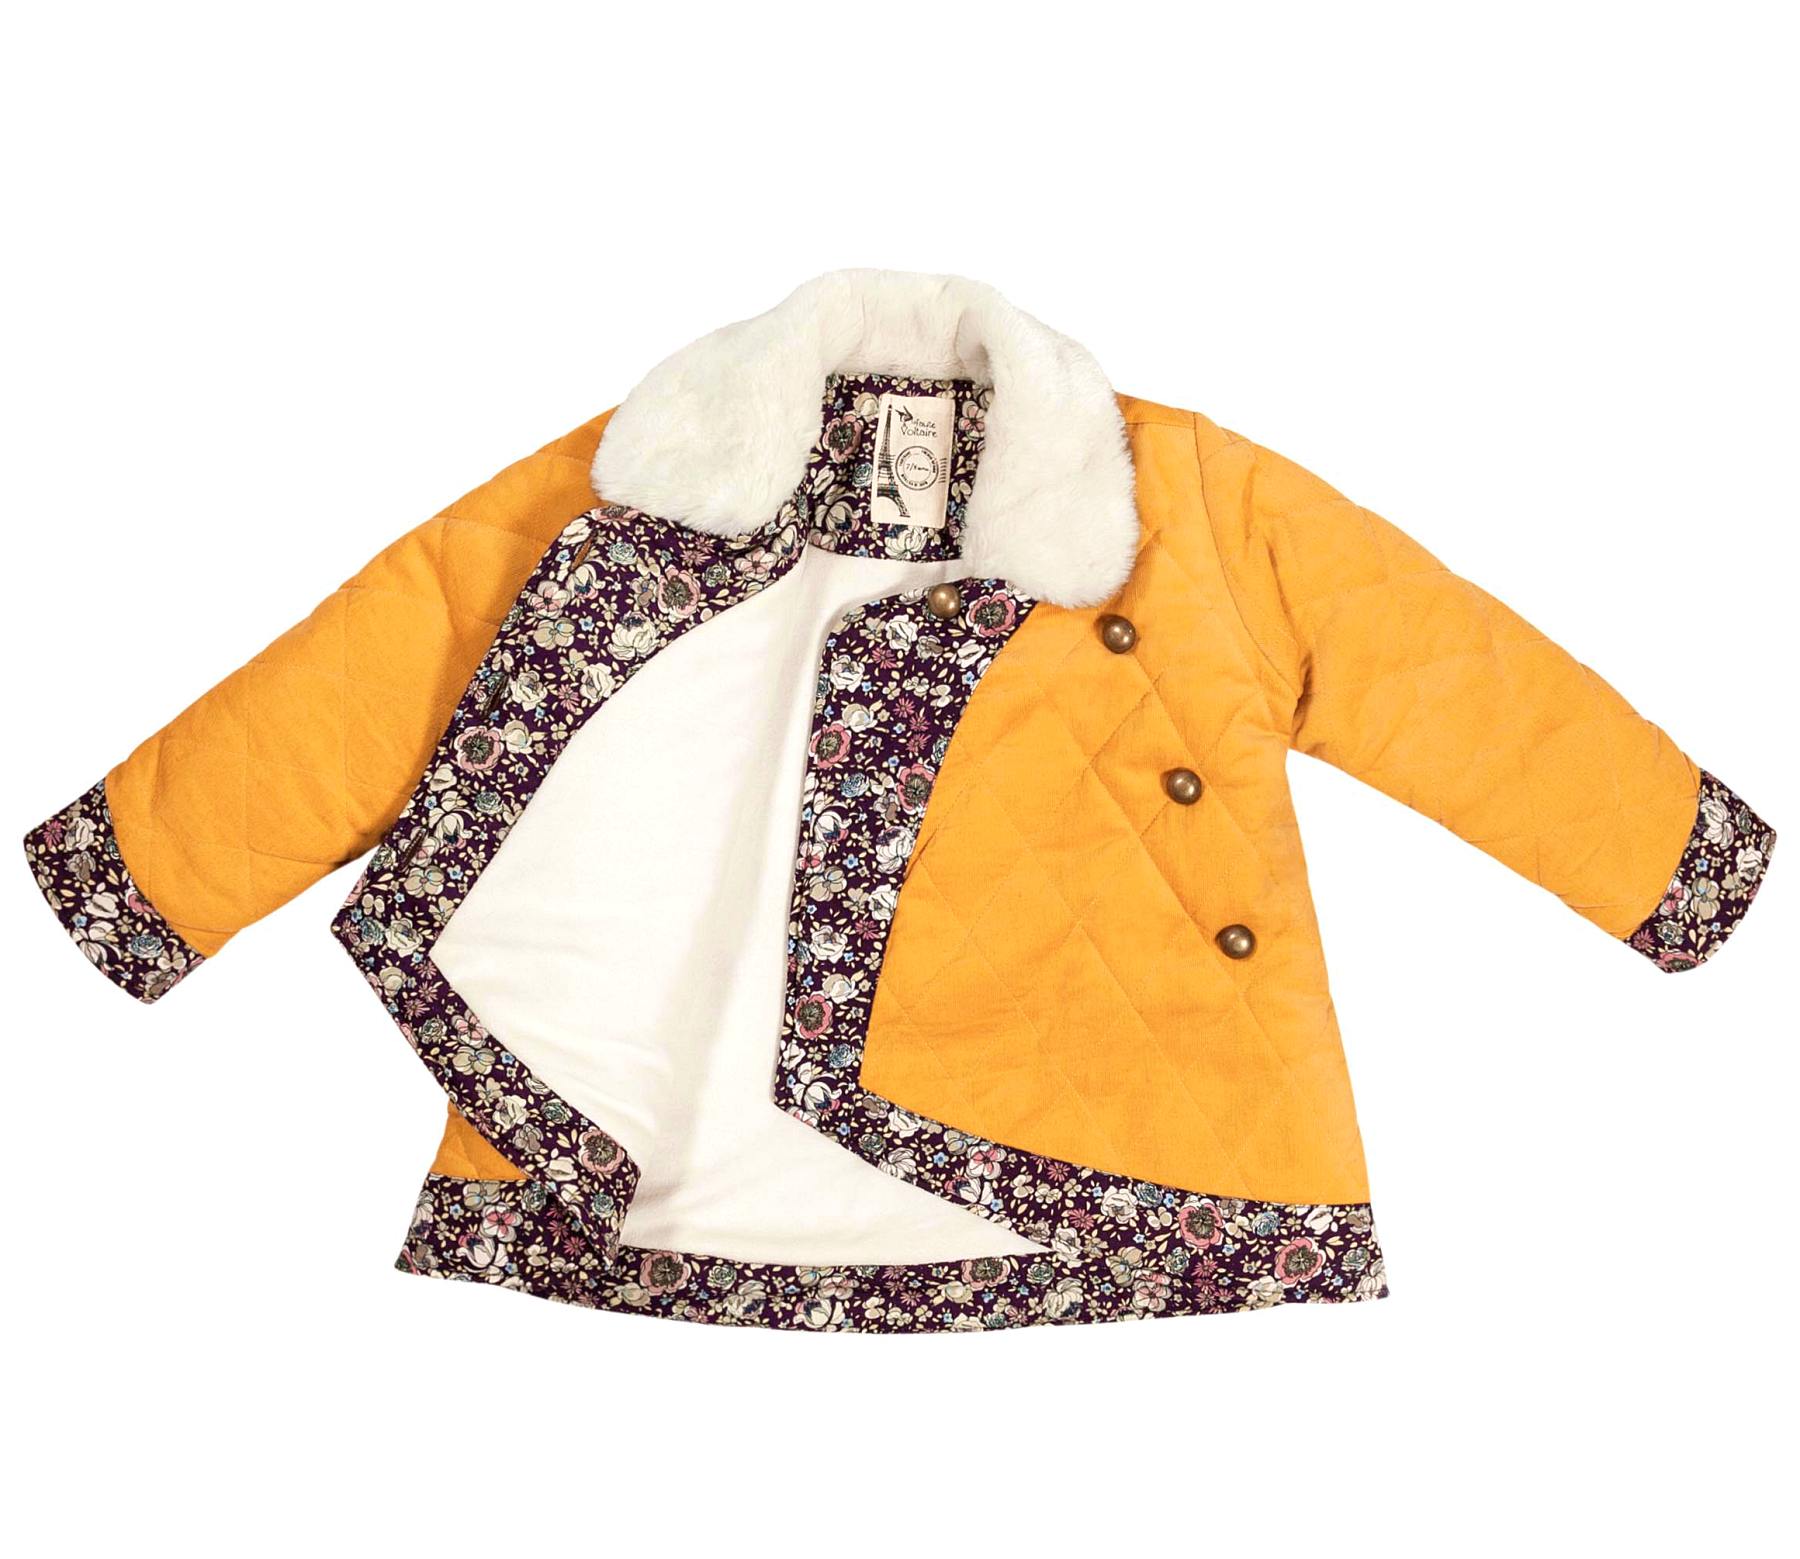 Kimono-style coat in yellow velvet and beige faux fur collar and floral cotton from the children's fashion brand LA FAUTE A VOLTAIRE